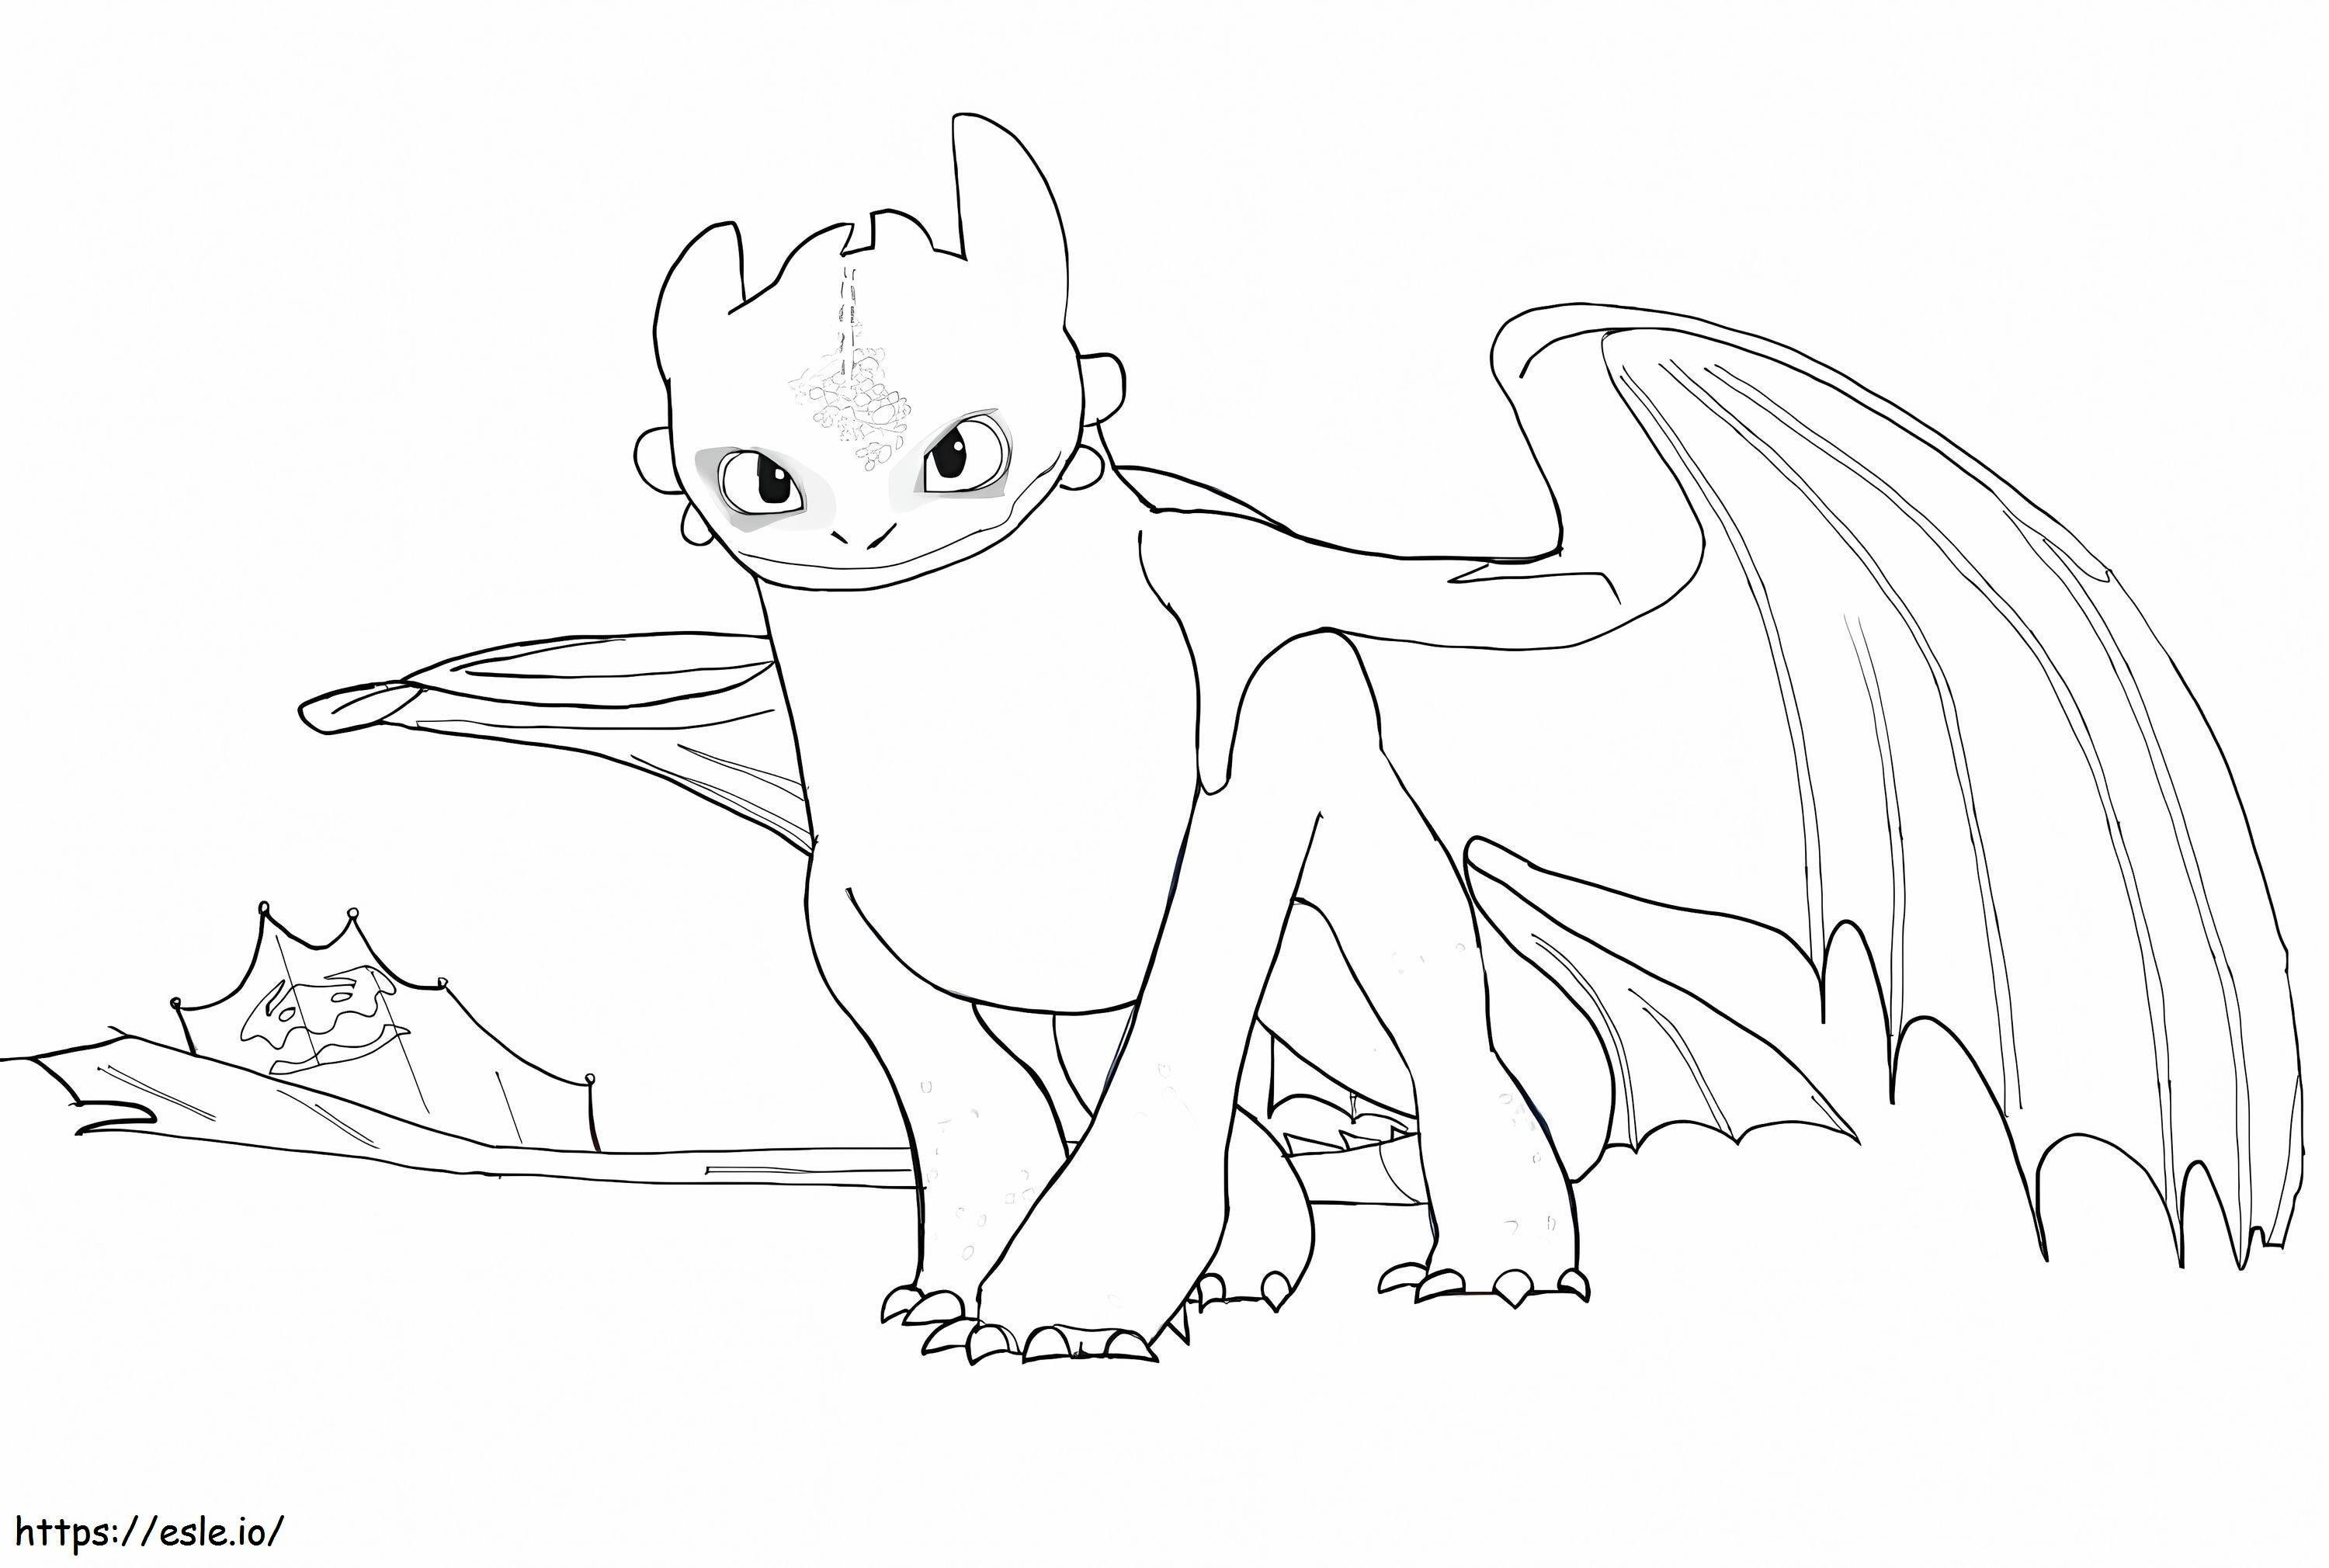 Amazing Toothless coloring page